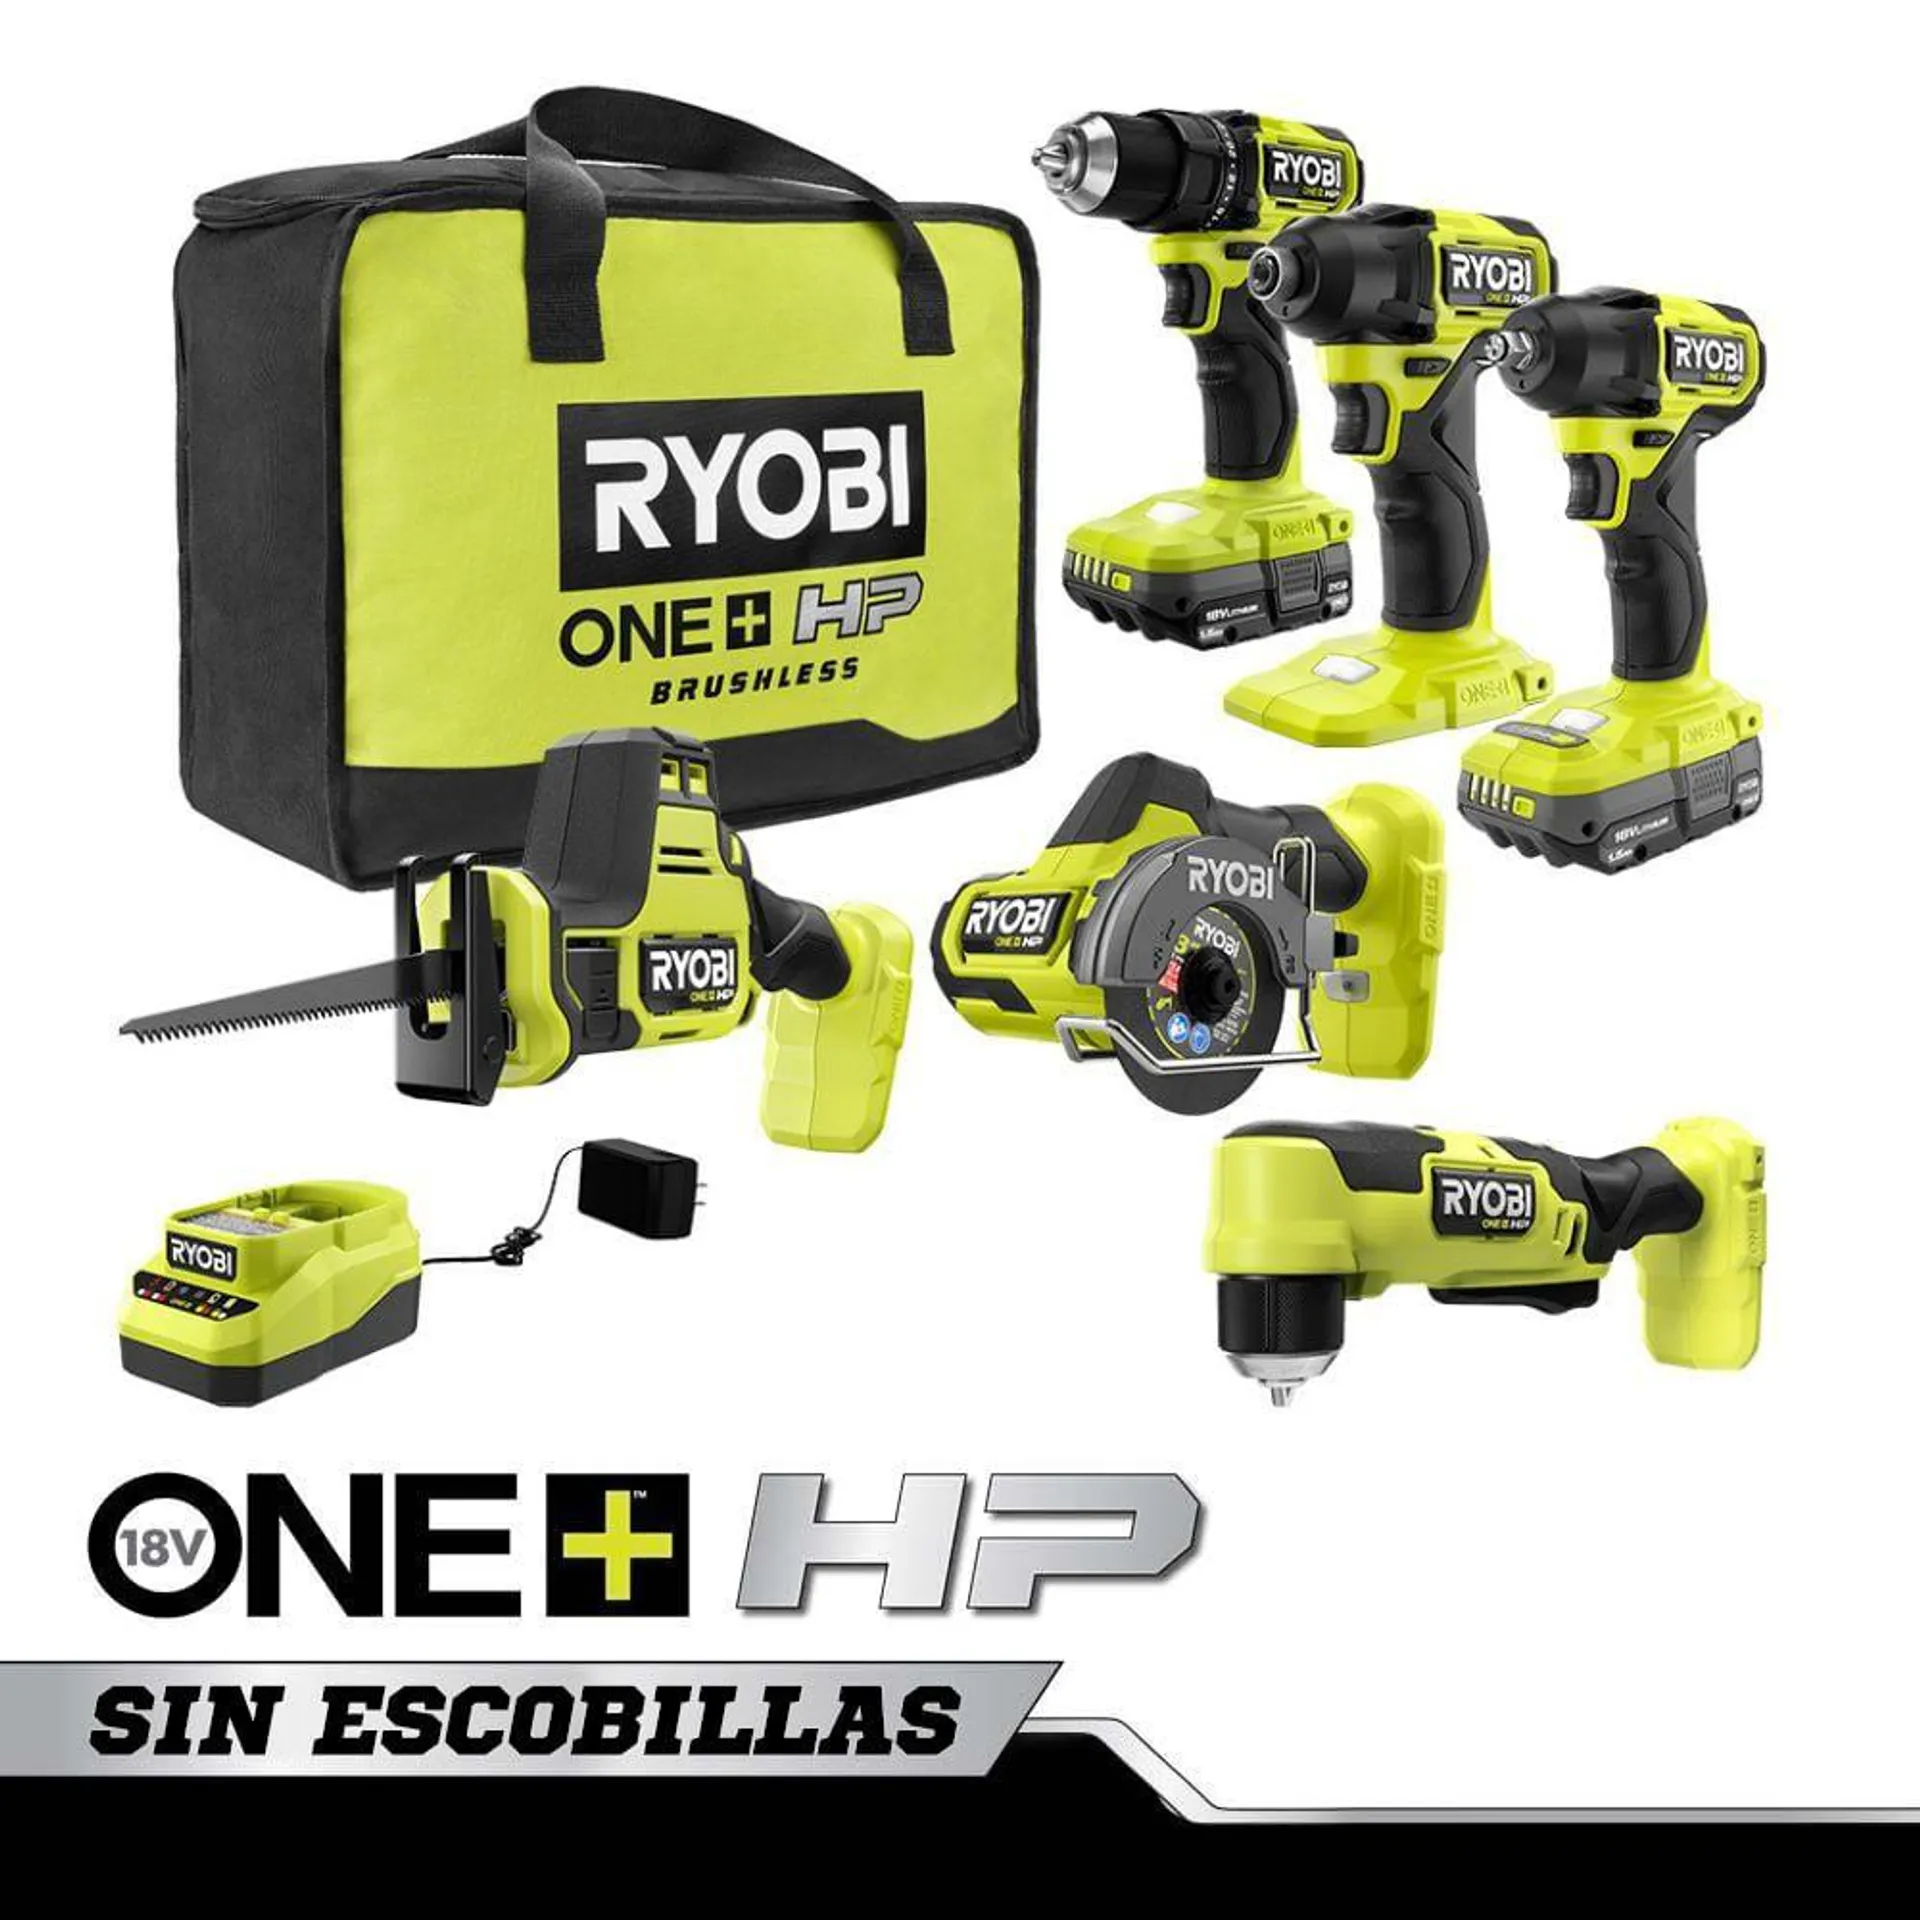 18V ONE+ HP Compact Brushless 6-Tool Combo Kit